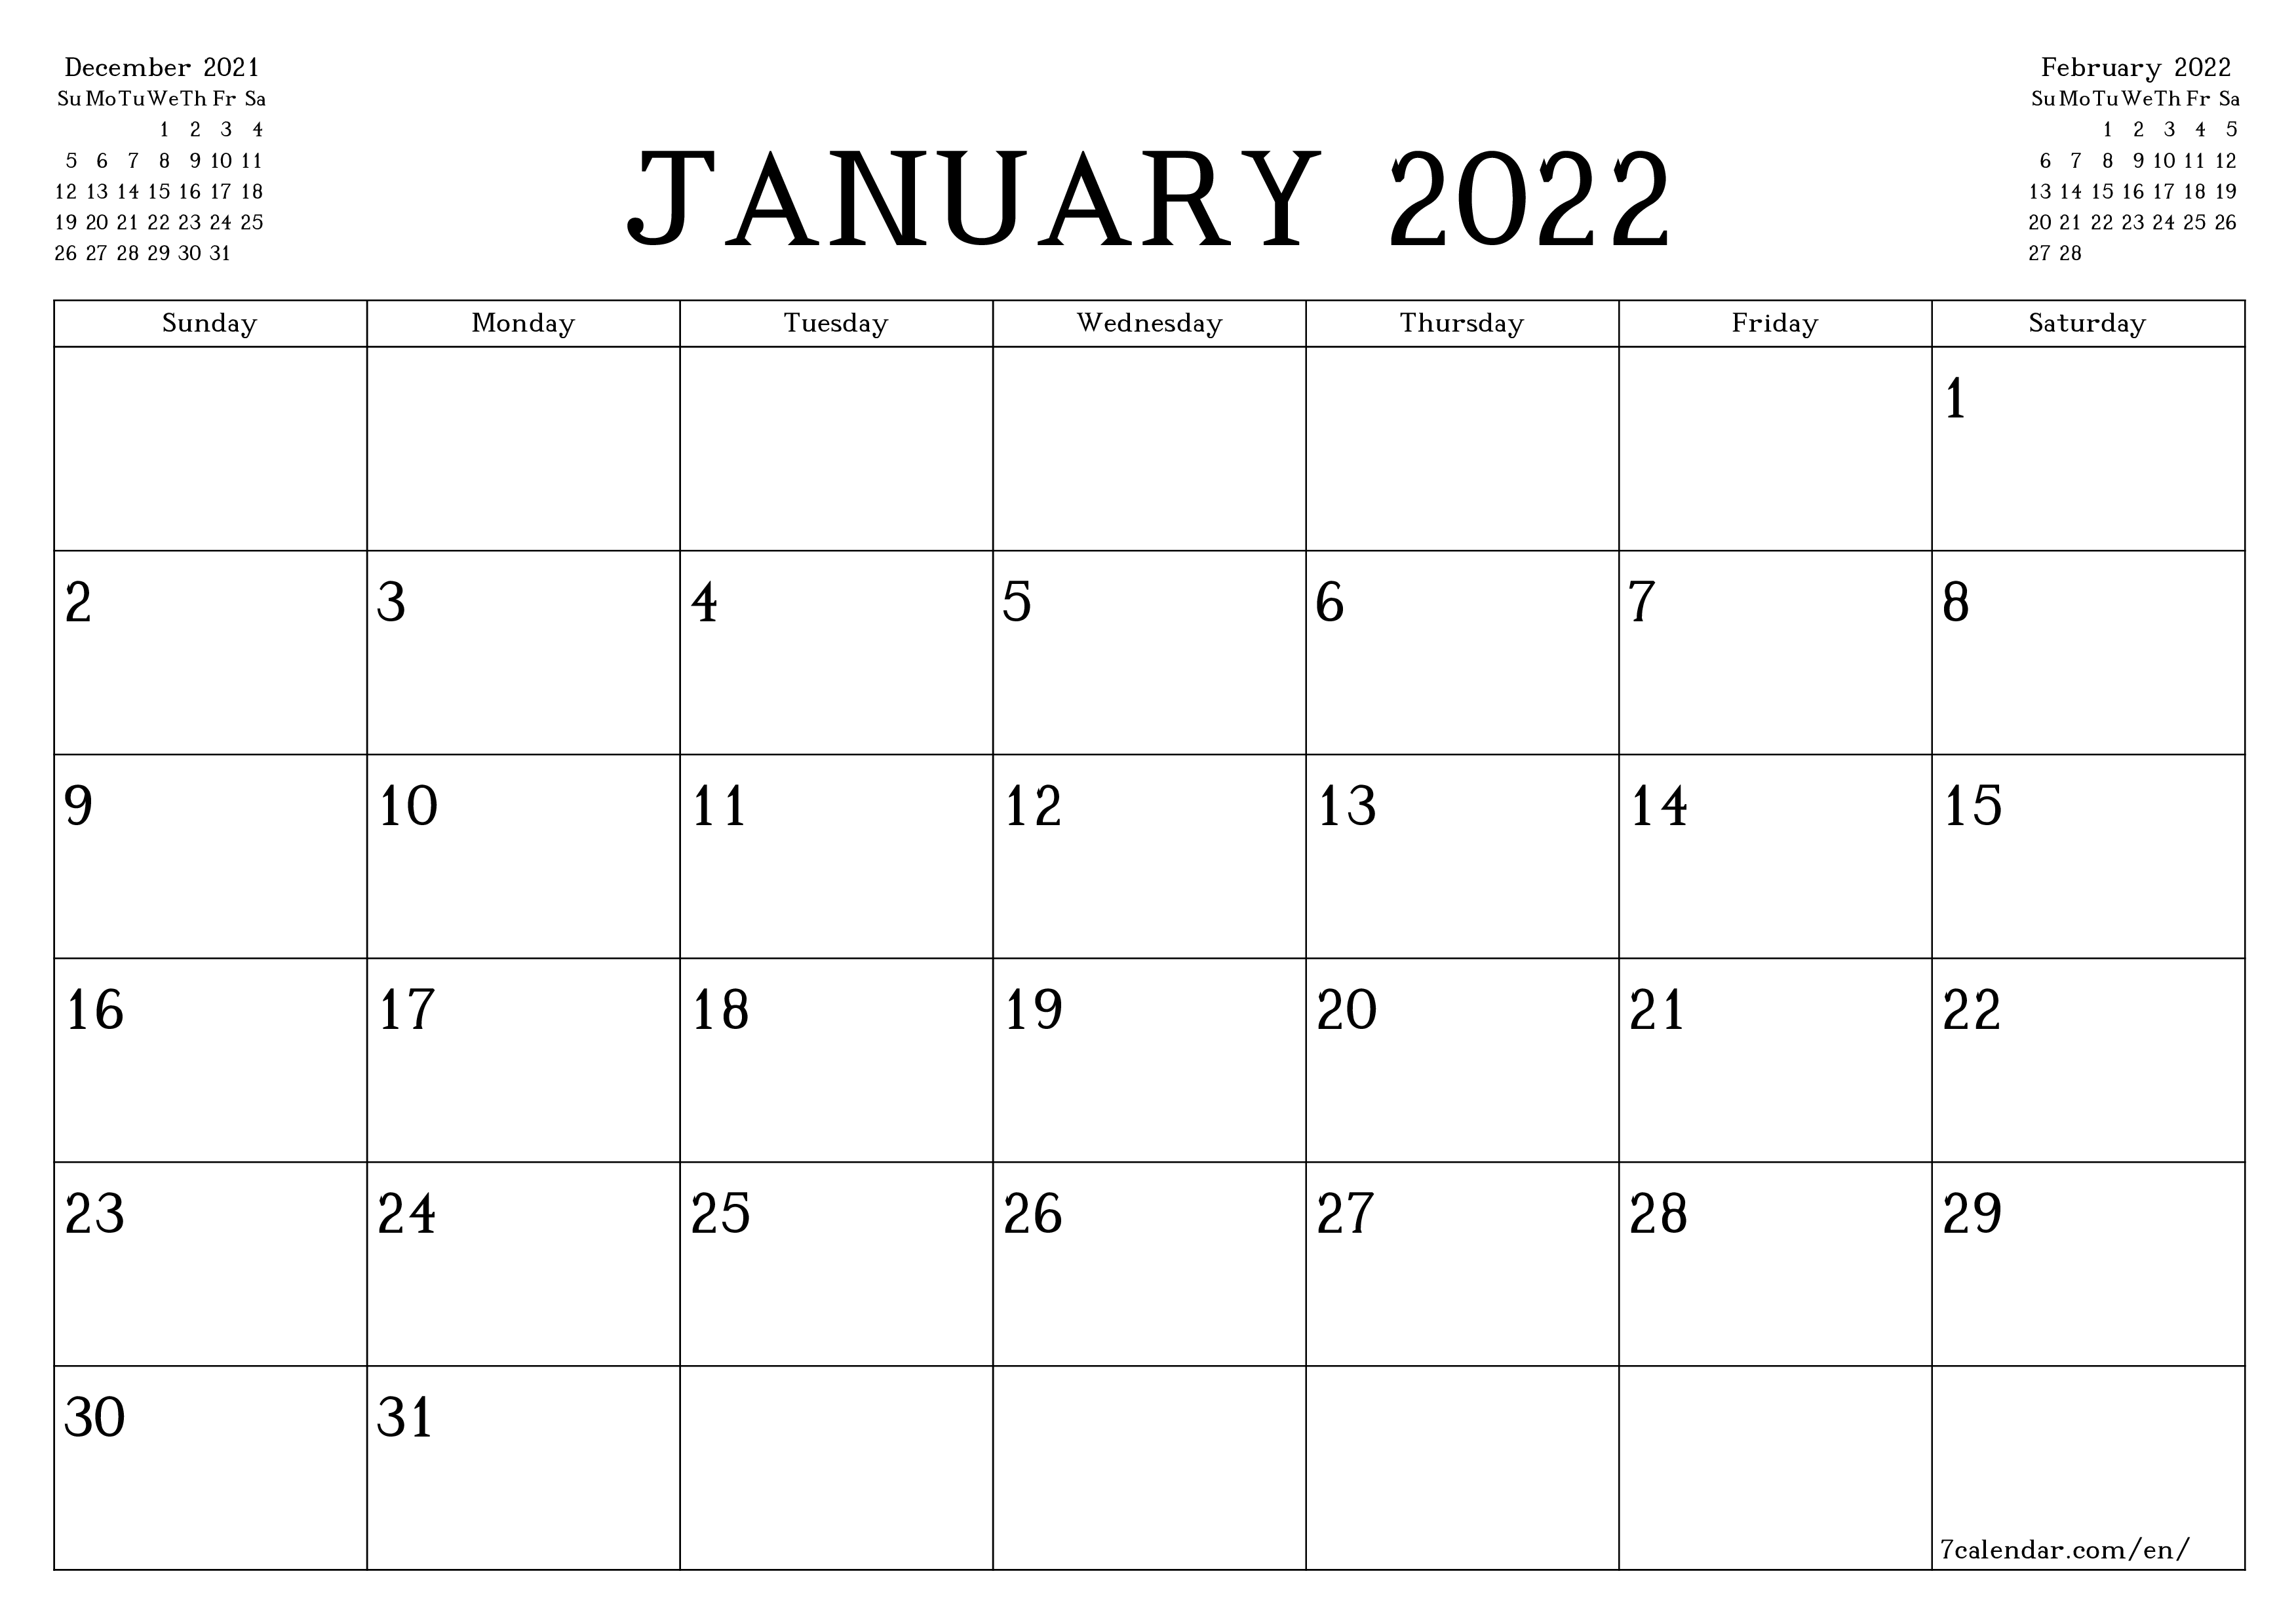 January Schedule 2022 January 2022 Free Printable Calendars And Planners, Pdf Templates -  7Calendar